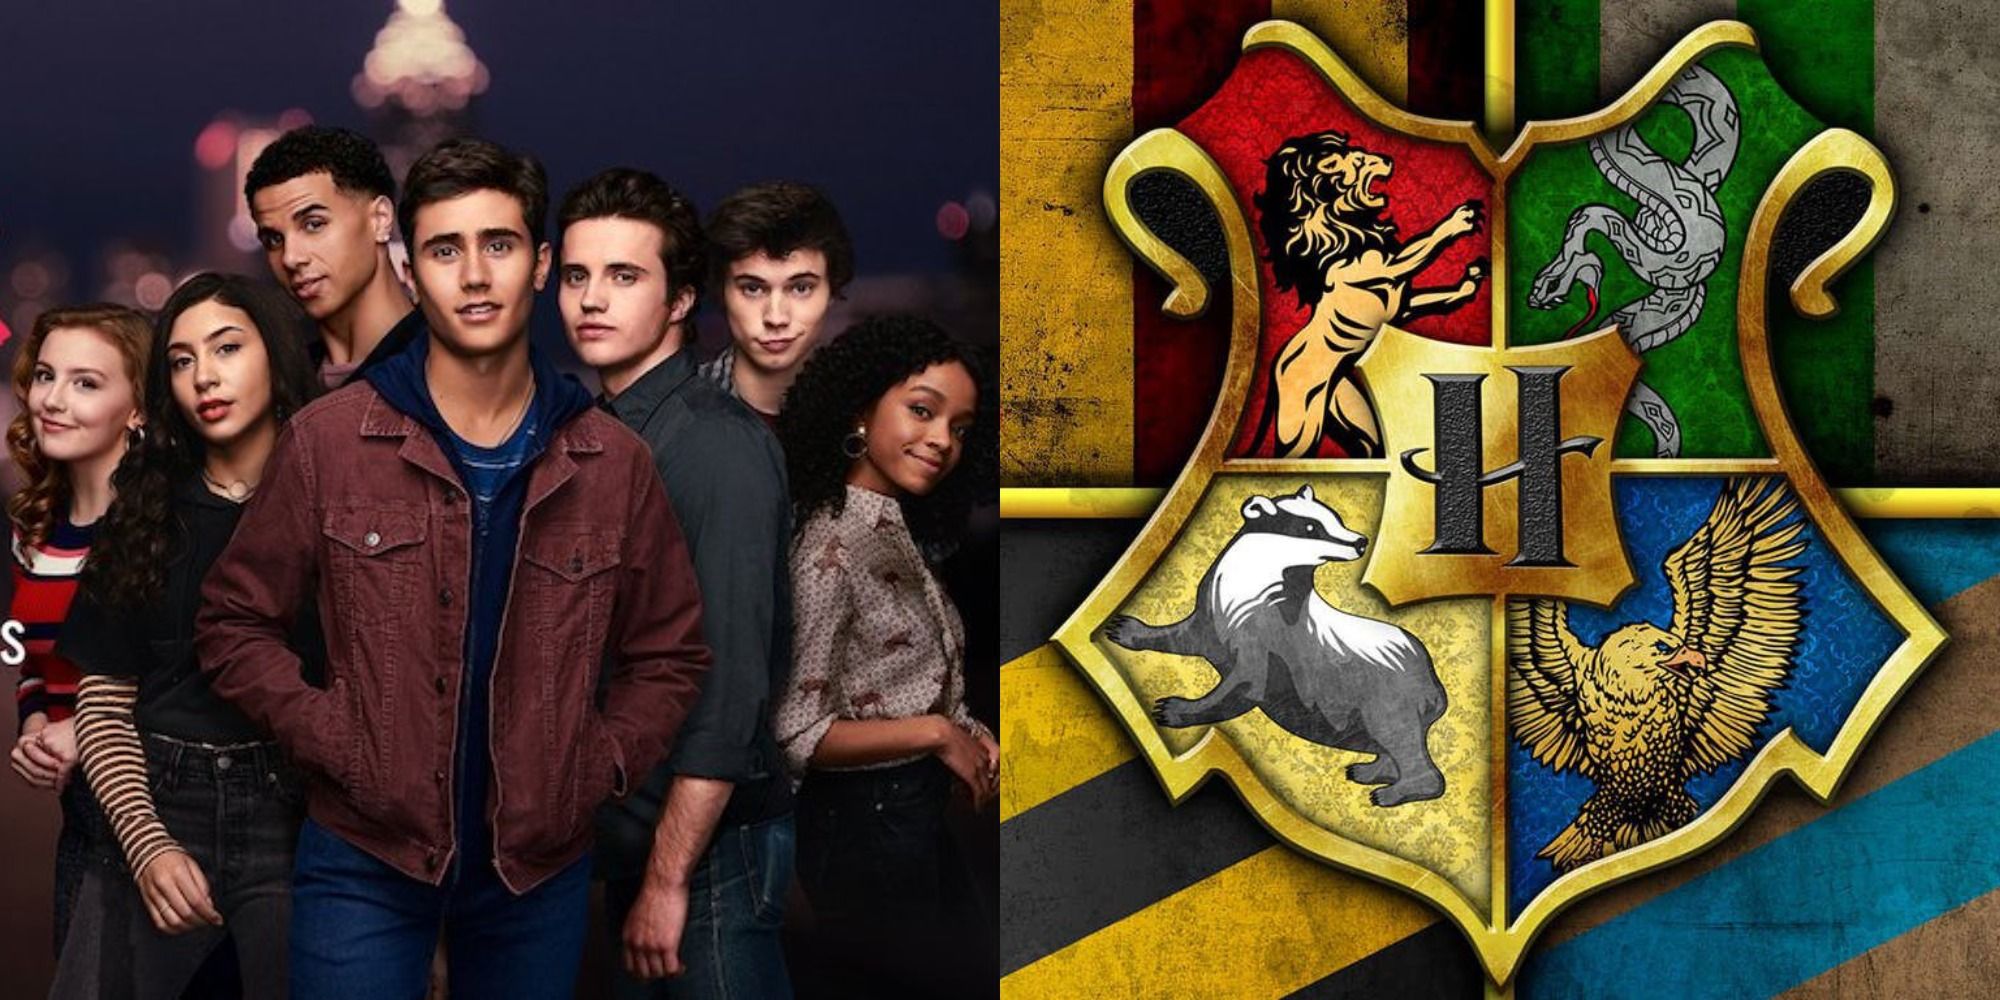 Slit image showing the cast of Love, Victor and the Hogwarts coat of arms